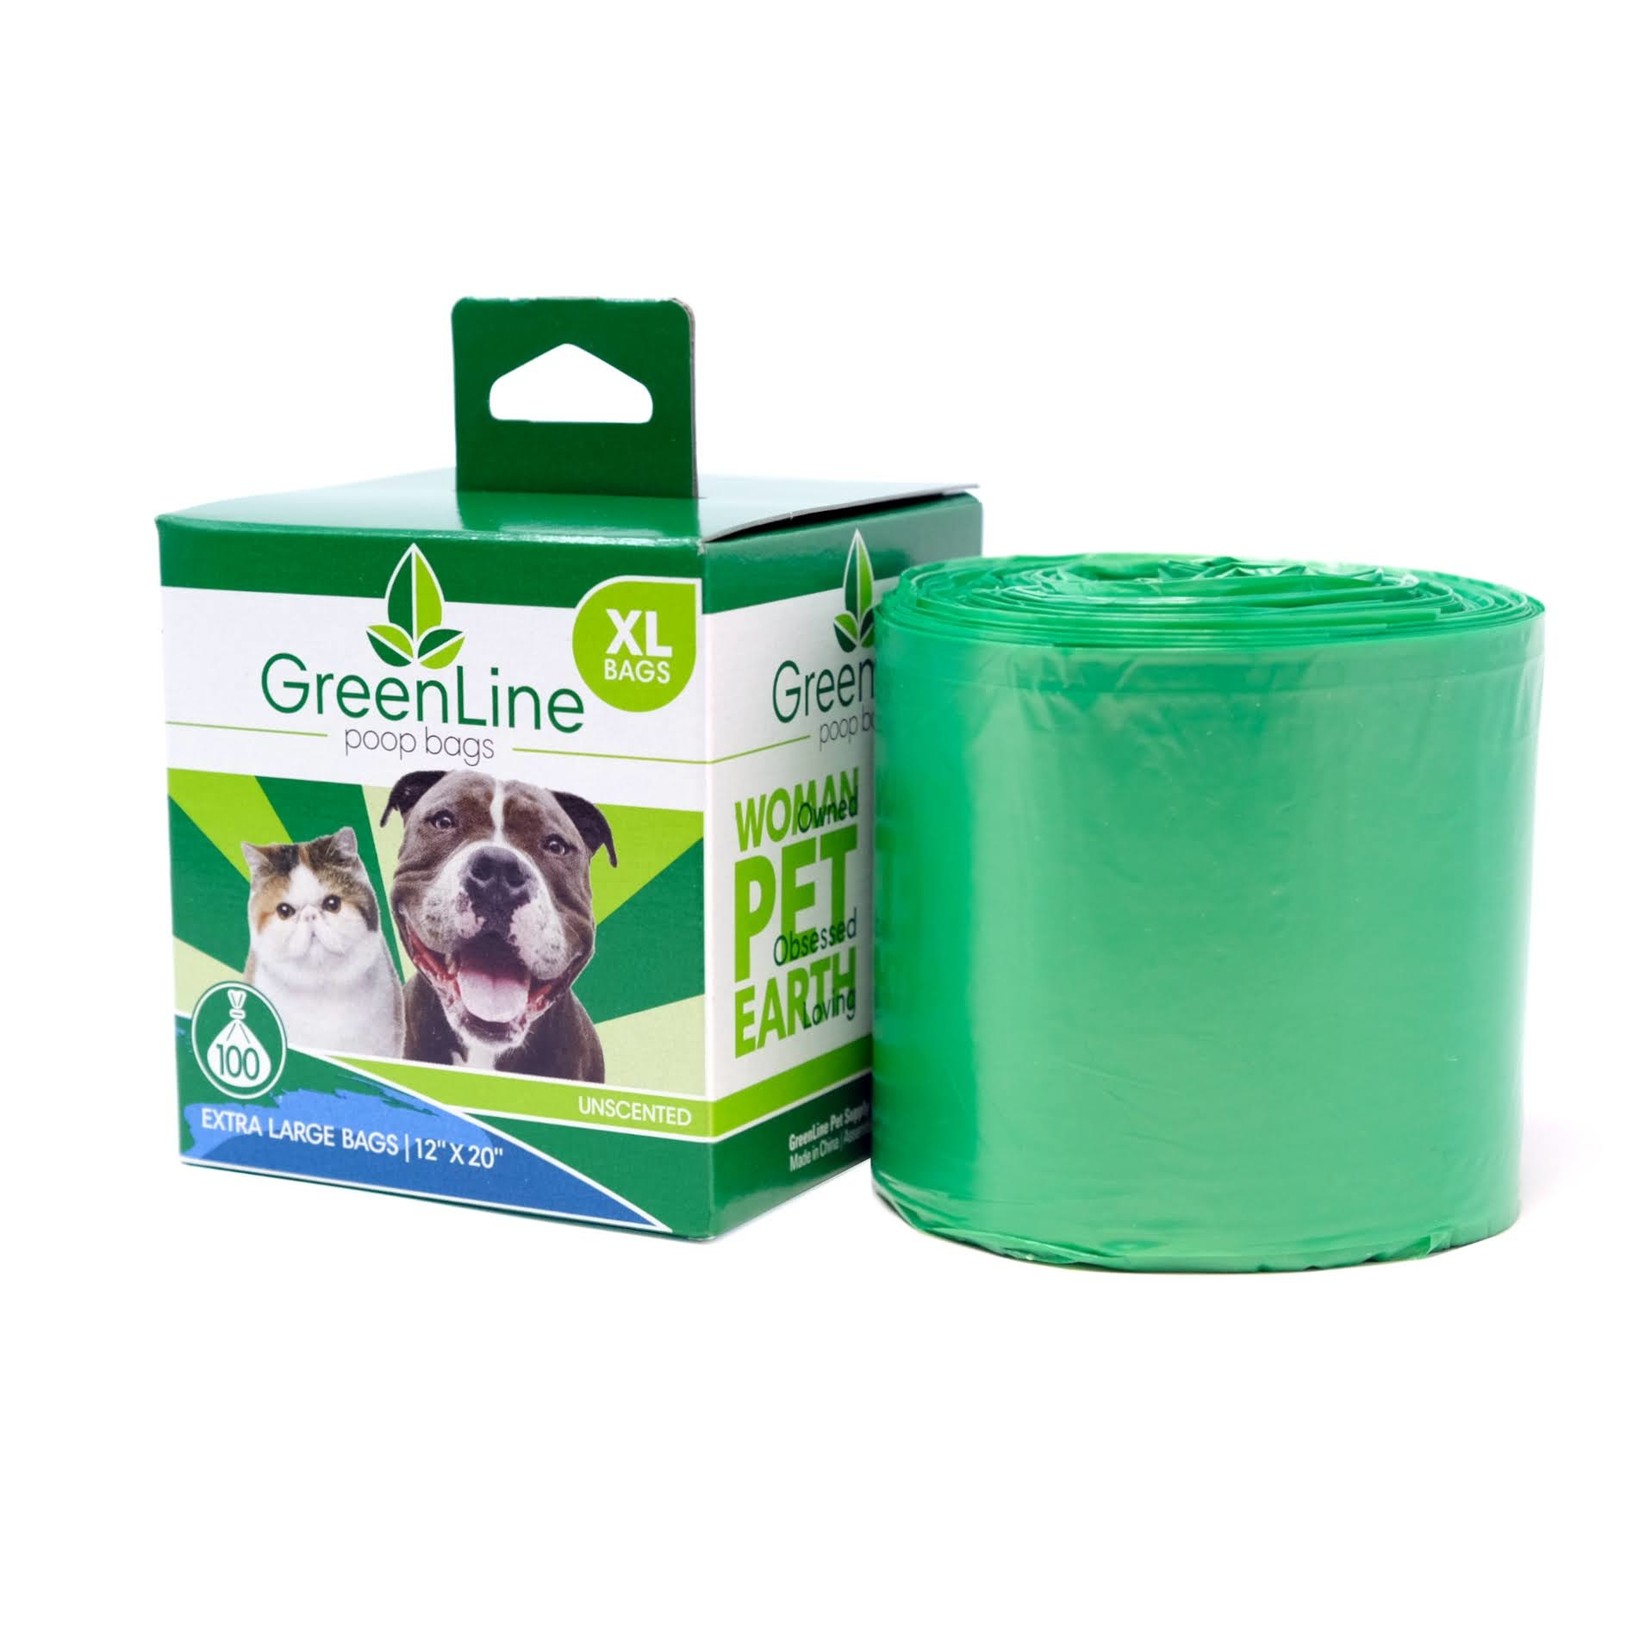 Greenline GreenLine Biodegradable Poop Bags Extra Large 100 ct